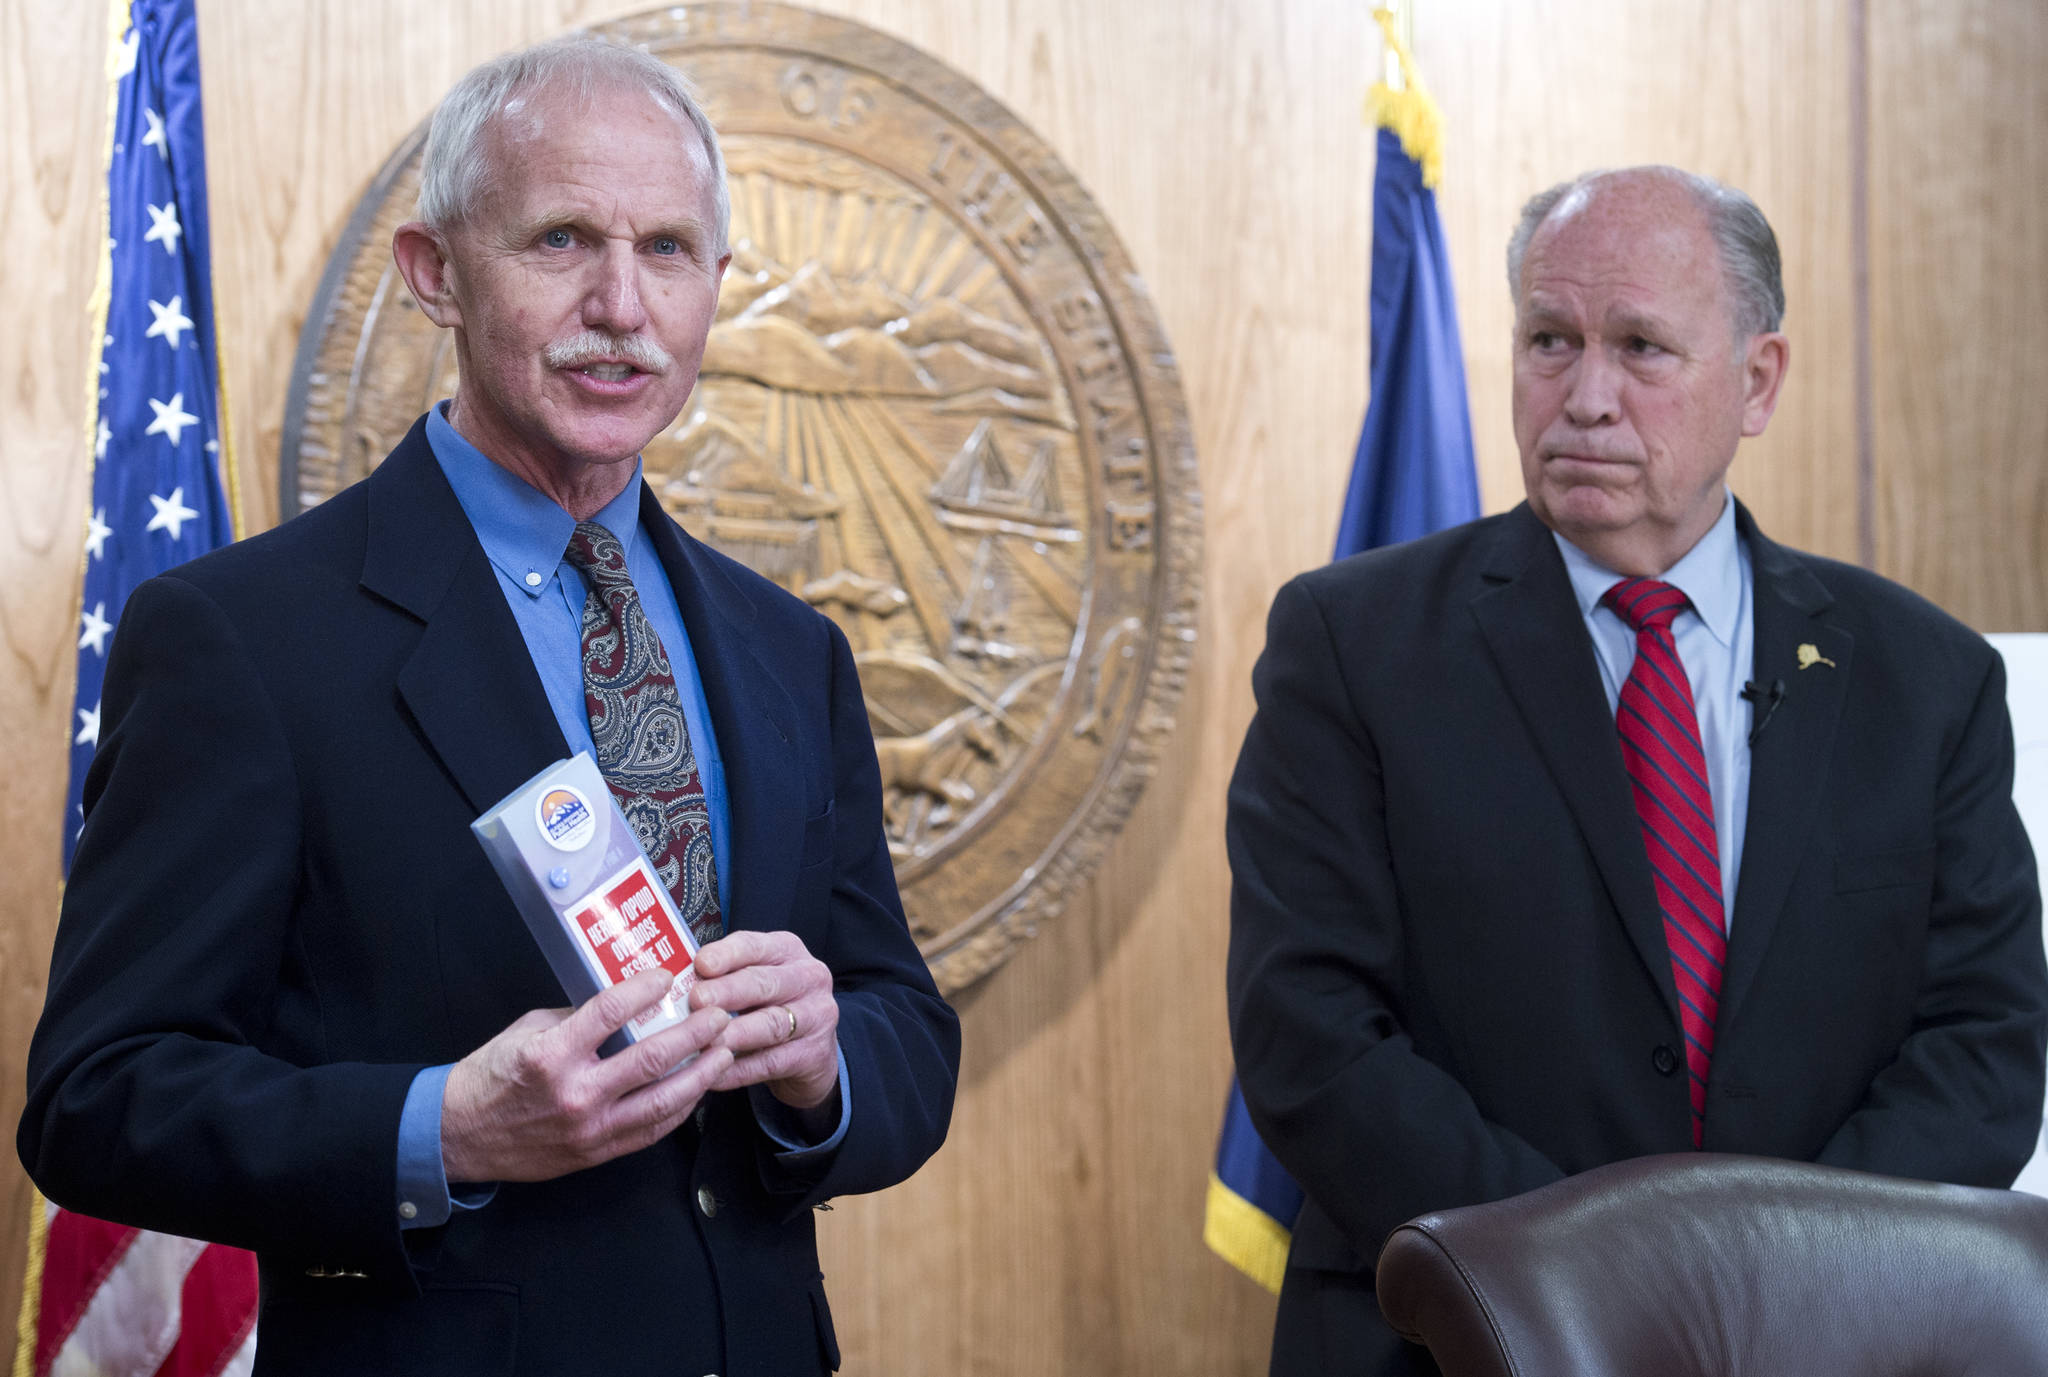 Dr. Jay Butler, Chief Medical Officer for the Department of Health and Social Services, left, speaks before Gov. Bill Walker signs SB 91 at the Capitol on Tuesday. The bill authorizes the chief medical officer of the DHSS to issue a standing order for the prescription of an opioid overdose drug. (Michael Penn | Juneau Empire)